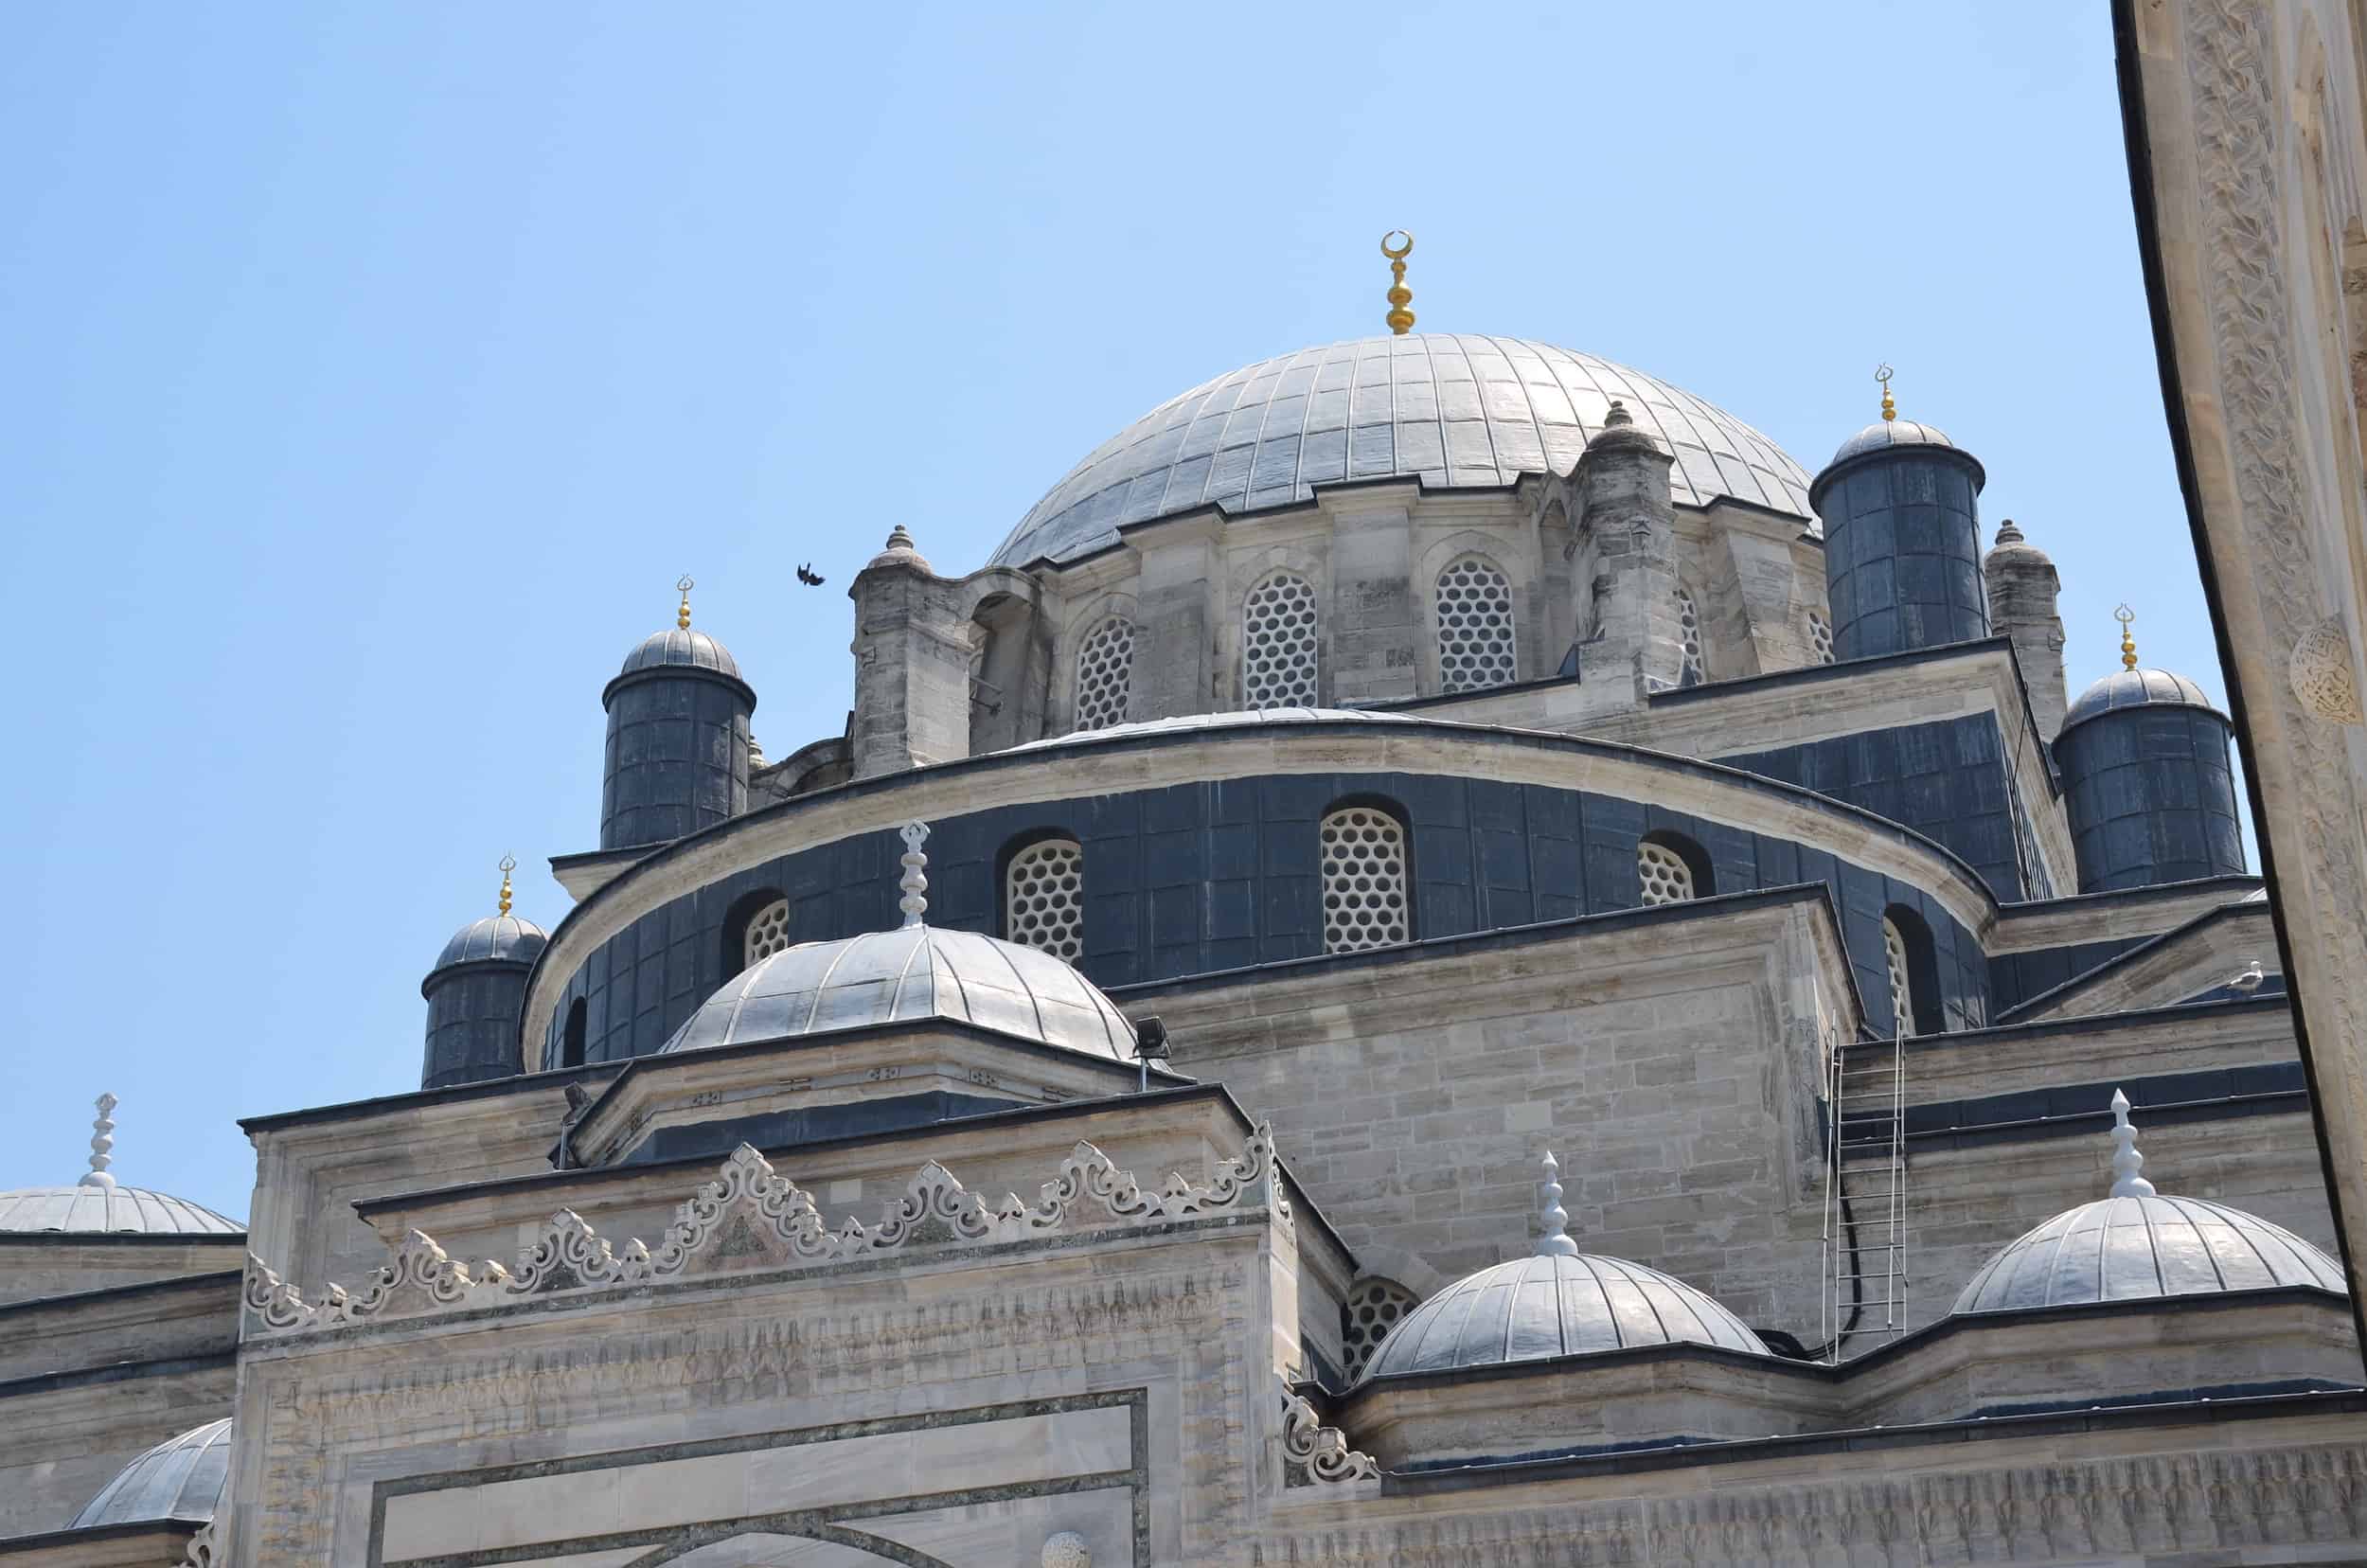 Dome of the Bayezid II Mosque in Istanbul, Turkey